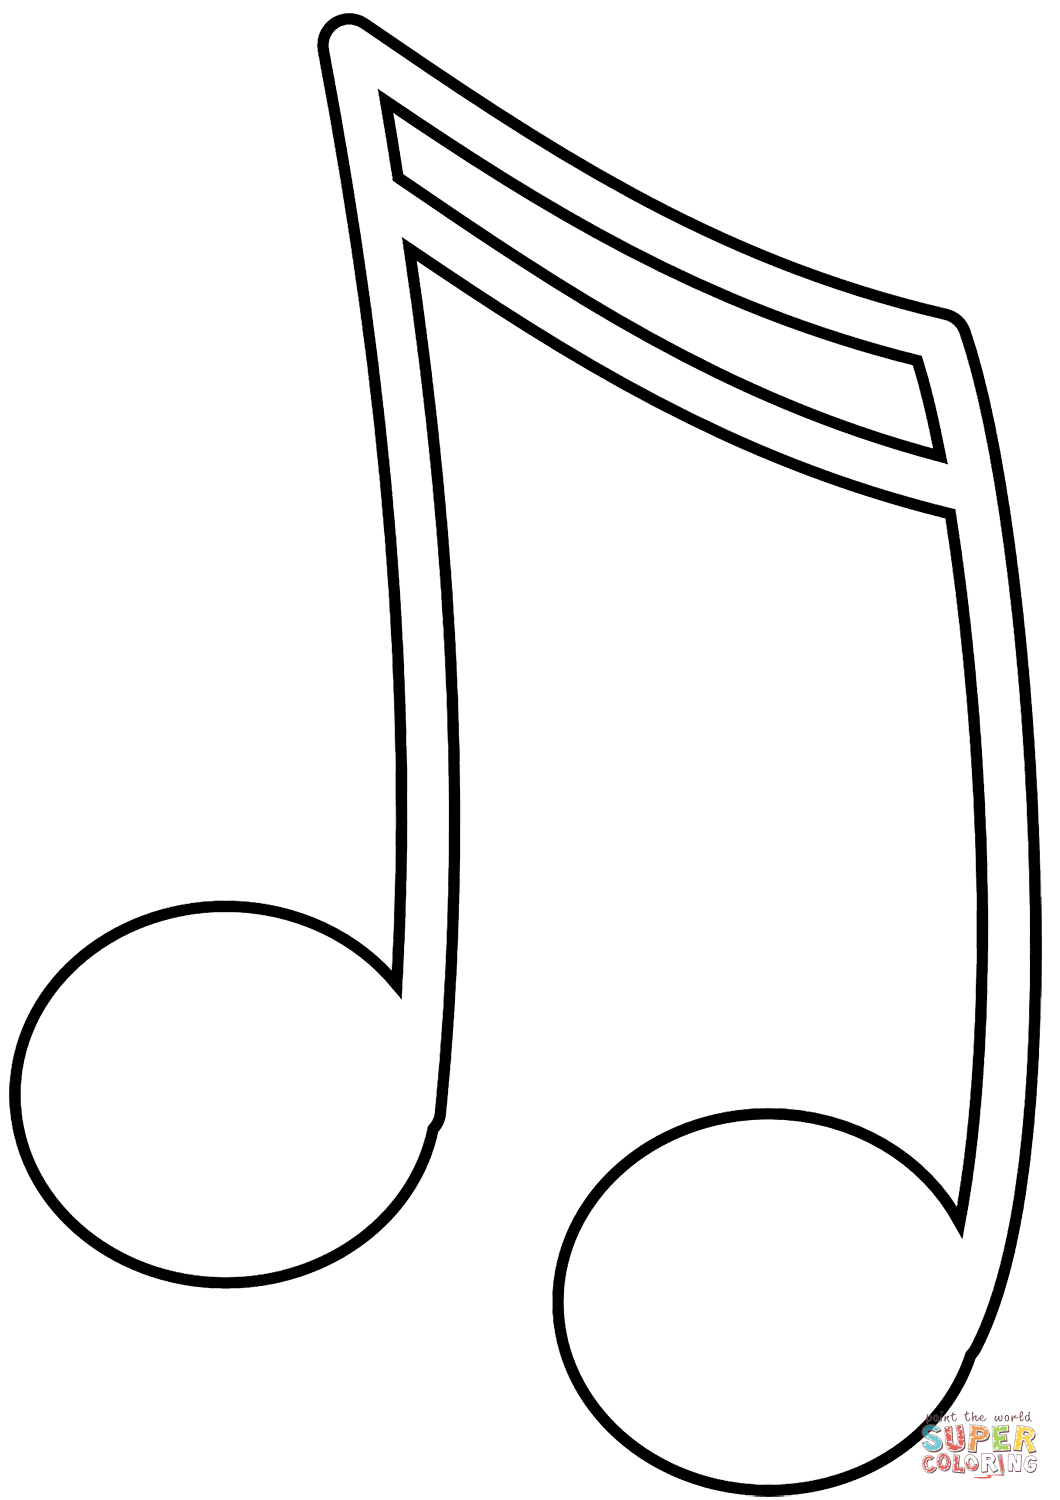 Music Notes Coloring Page Music Note Coloring Page Free Printable Coloring Pages